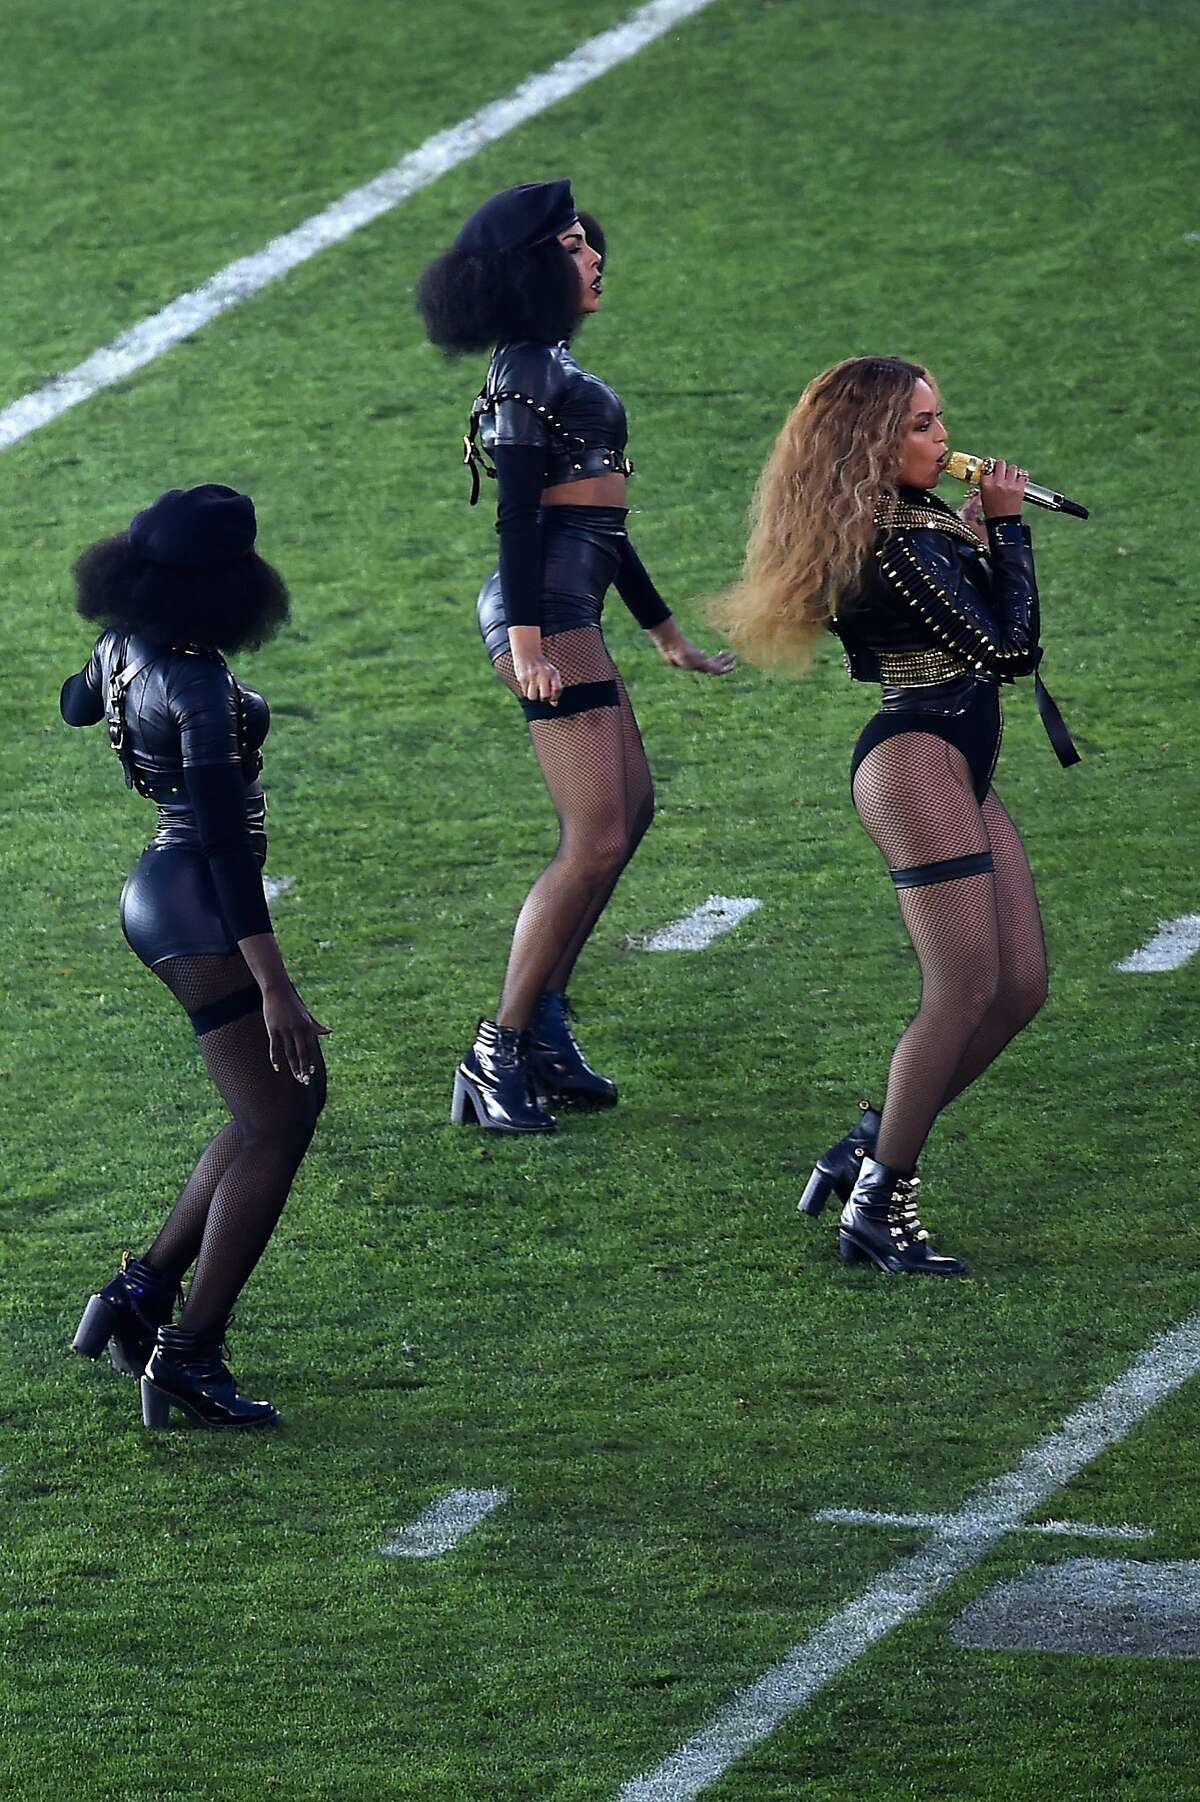 Beyonce performs during the Pepsi Super Bowl 50 Halftime Show at Levi's Stadium on February 7, 2016 in Santa Clara, California. (Photo by Thearon W. Henderson/Getty Images)